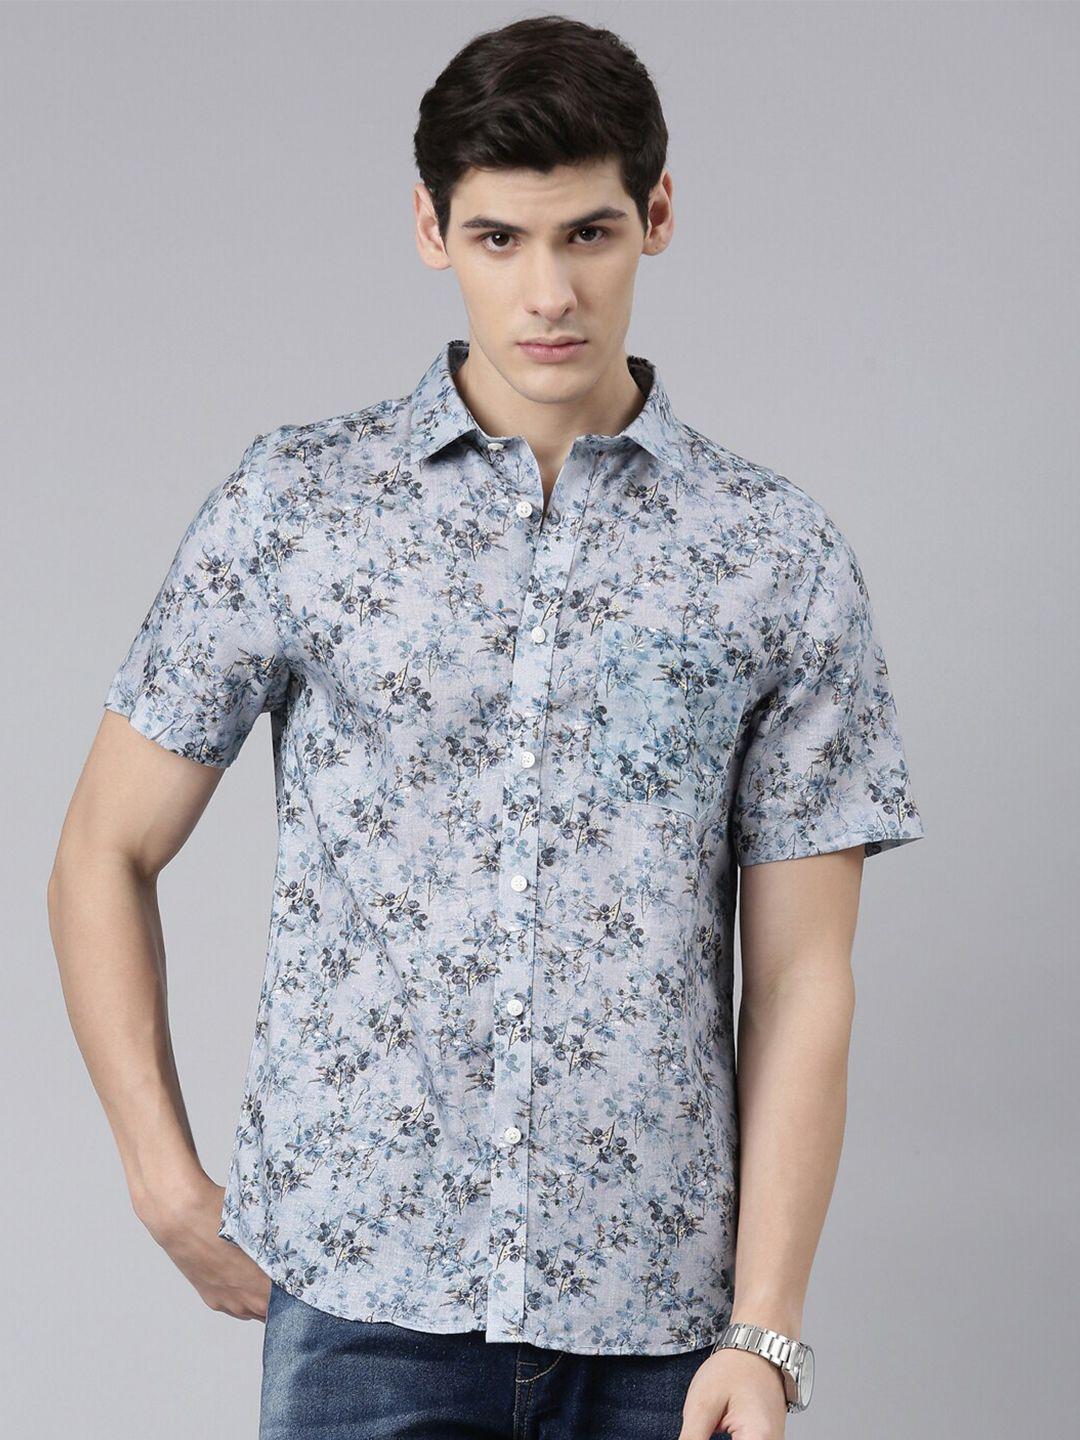 chennis floral printed classic slim fit linen cotton casual shirt